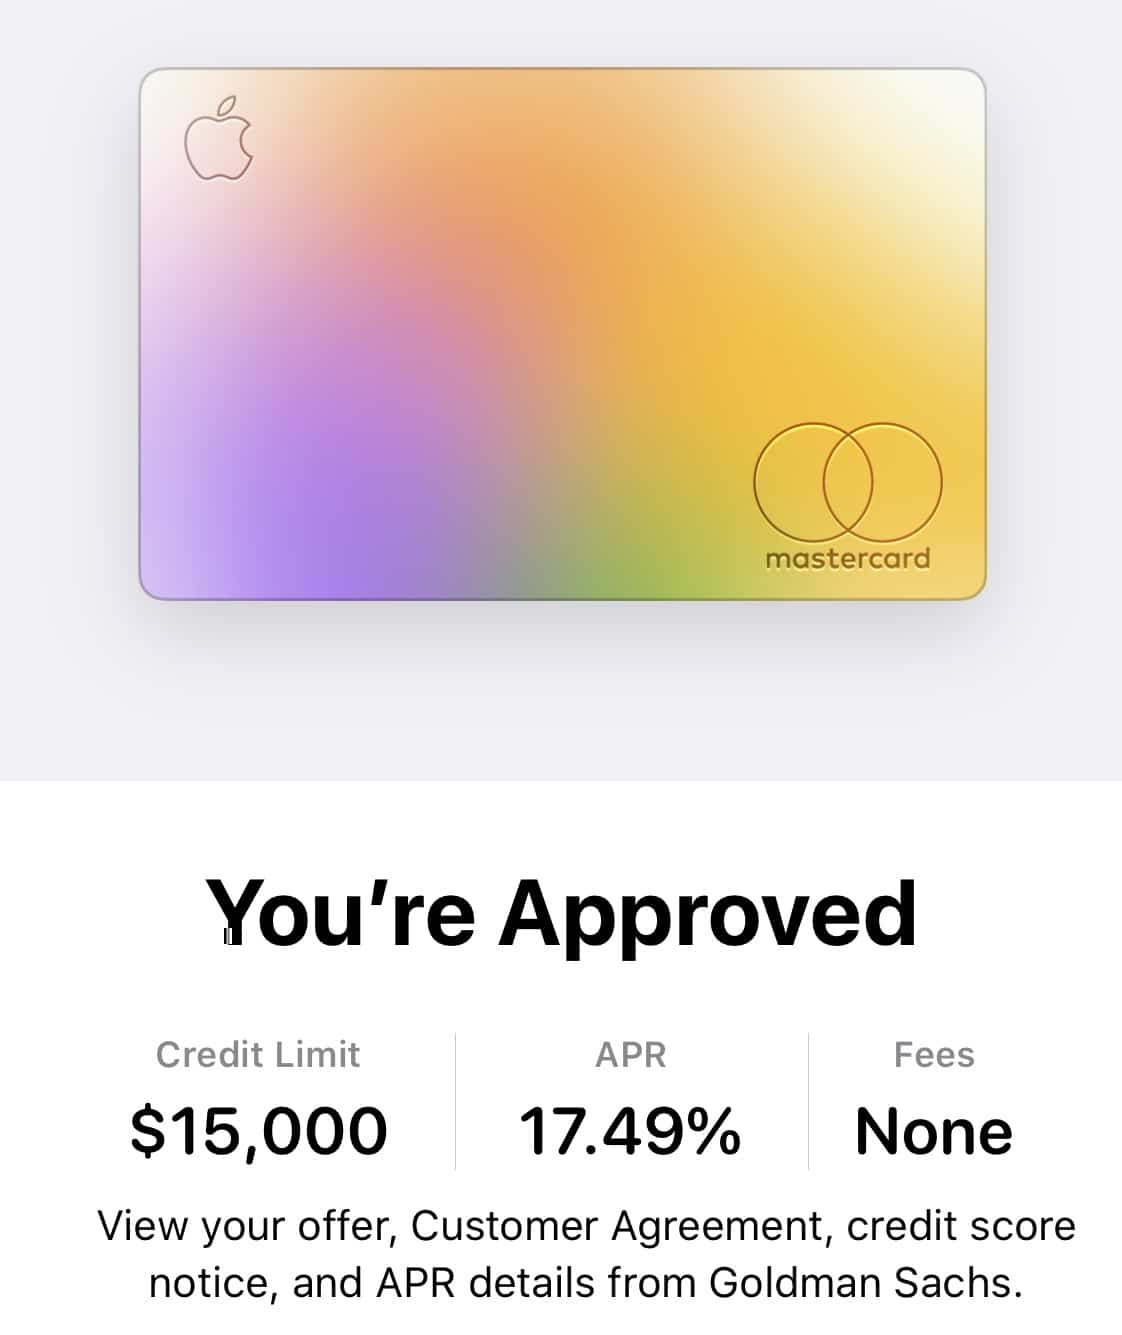 Approved for Apple Card and Turned It Down